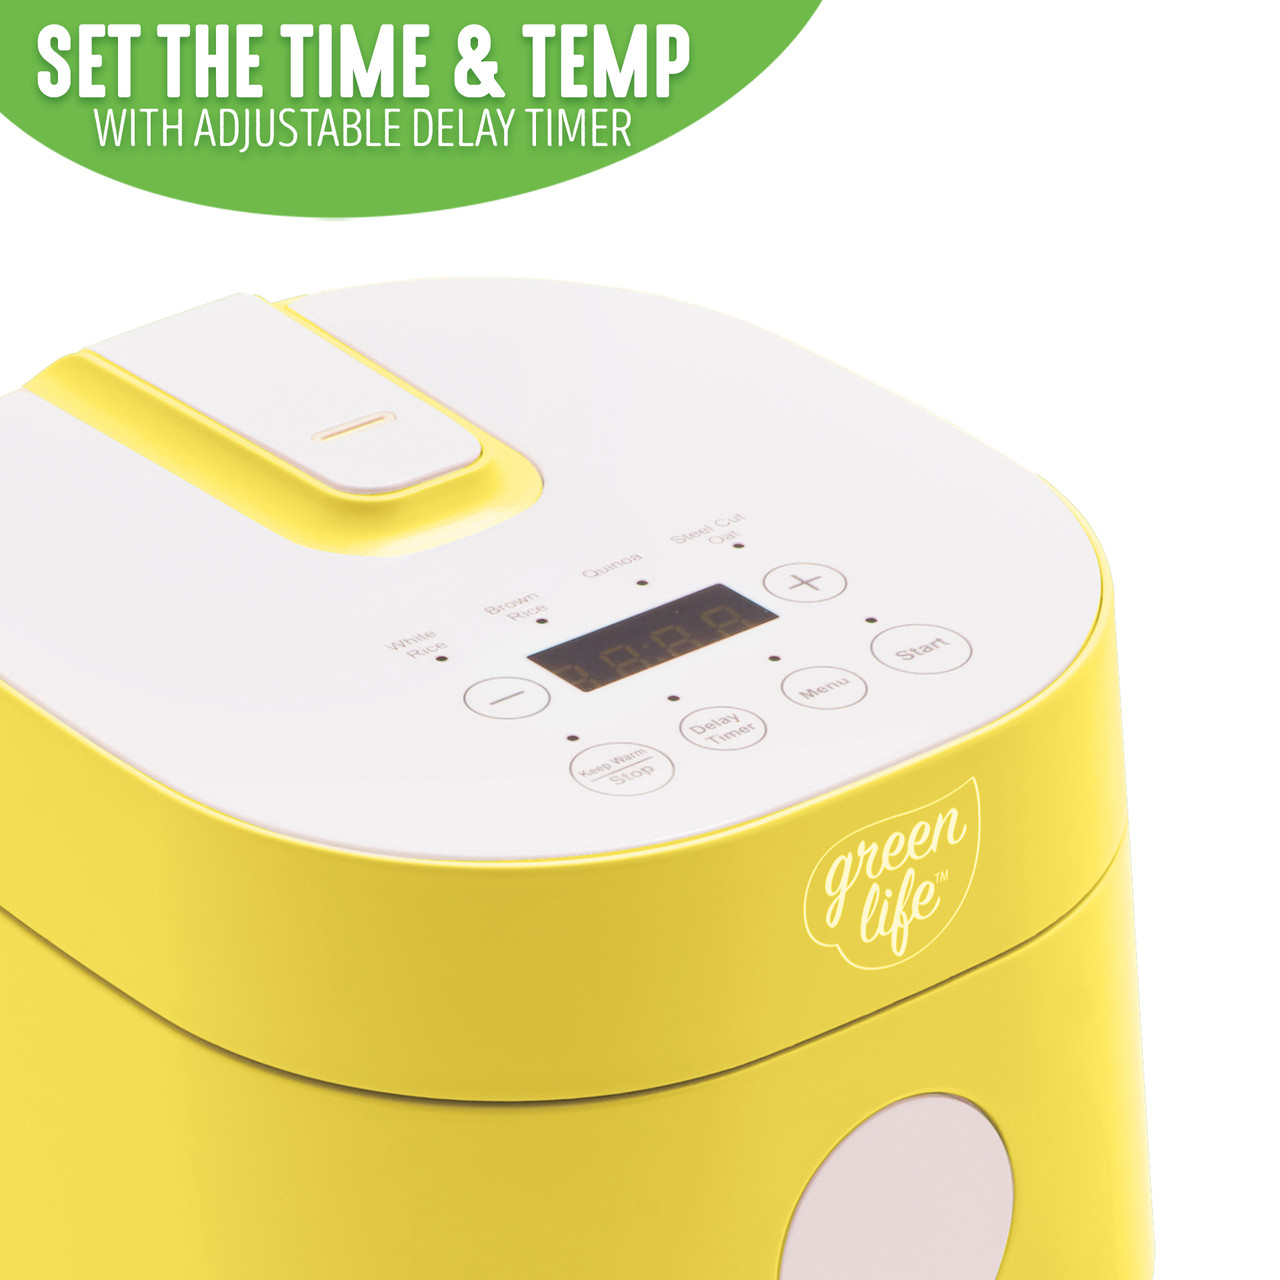 GreenLife Rice Cooker, White